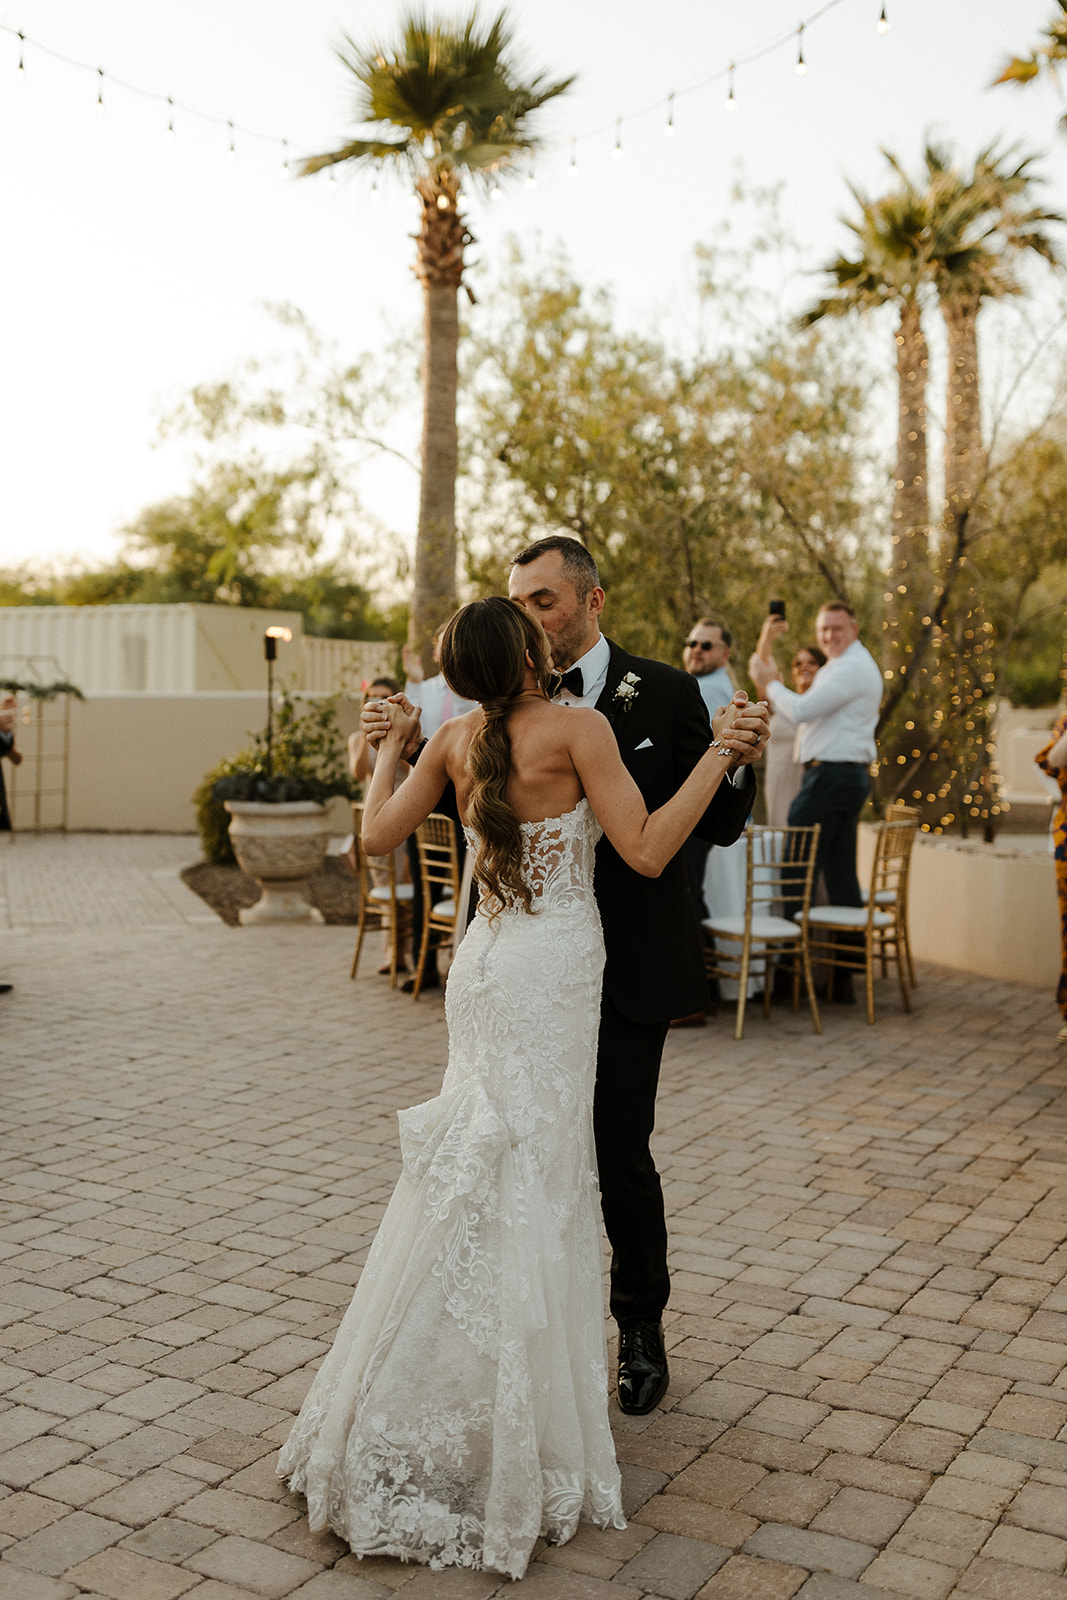 Bride and groom dance together during their Arizona wedding at The Secret Garden Event Center